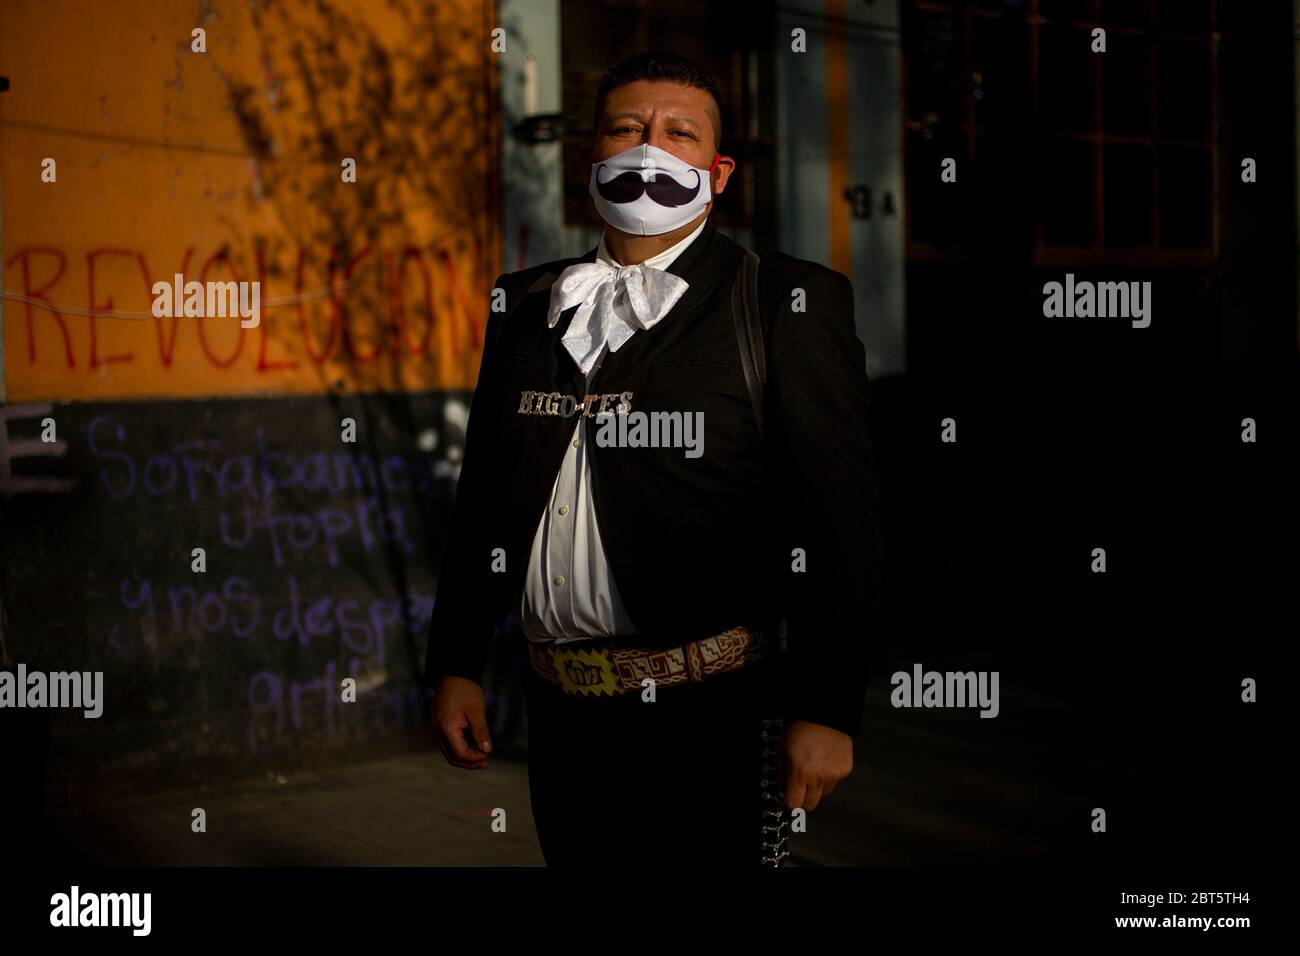 Mexiko Stadt, Mexico. 16th May, 2020. Jose Fuentes, known as 'El bigotes' (The Moustache), poses near Plaza Garibaldi and wears a mouthguard with a moustache print. Mexico's mariachis are in trouble because the anti-corona measures deprive them of their livelihood. (to dpa 'Serenade against donation: Mariachis in Mexico ask for 'rescue') Credit: Jair Cabrera Torres//dpa/Alamy Live News Stock Photo